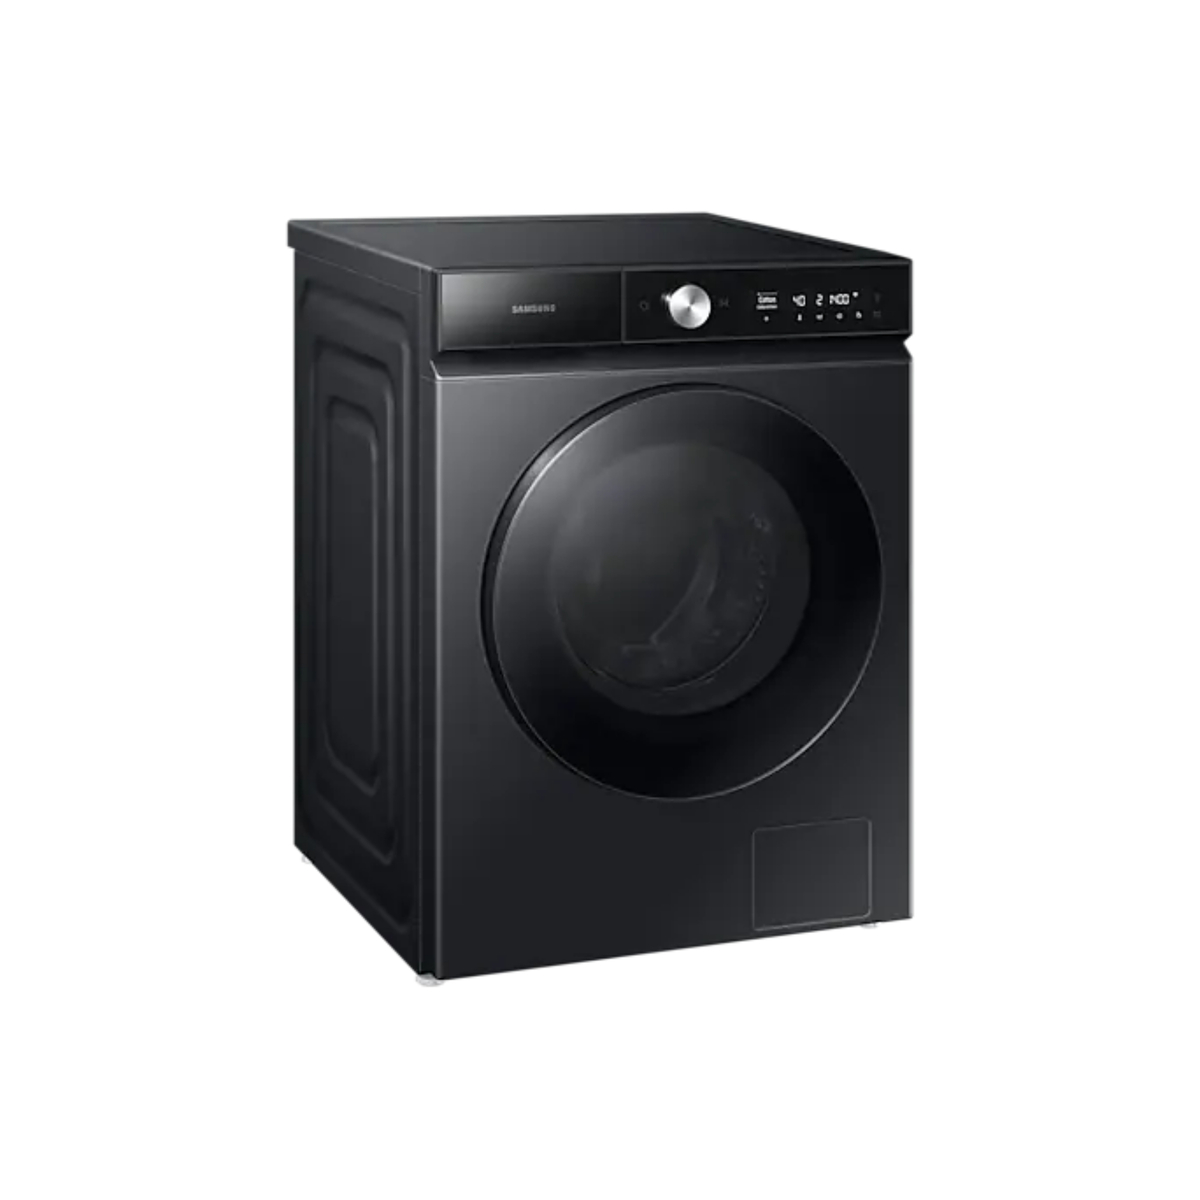 Samsung Washer Dryer Combo with AI Ecobubble and AI Wash, 11 8 Kg, 1400 RPM, Black, WD11BB944DGBGU